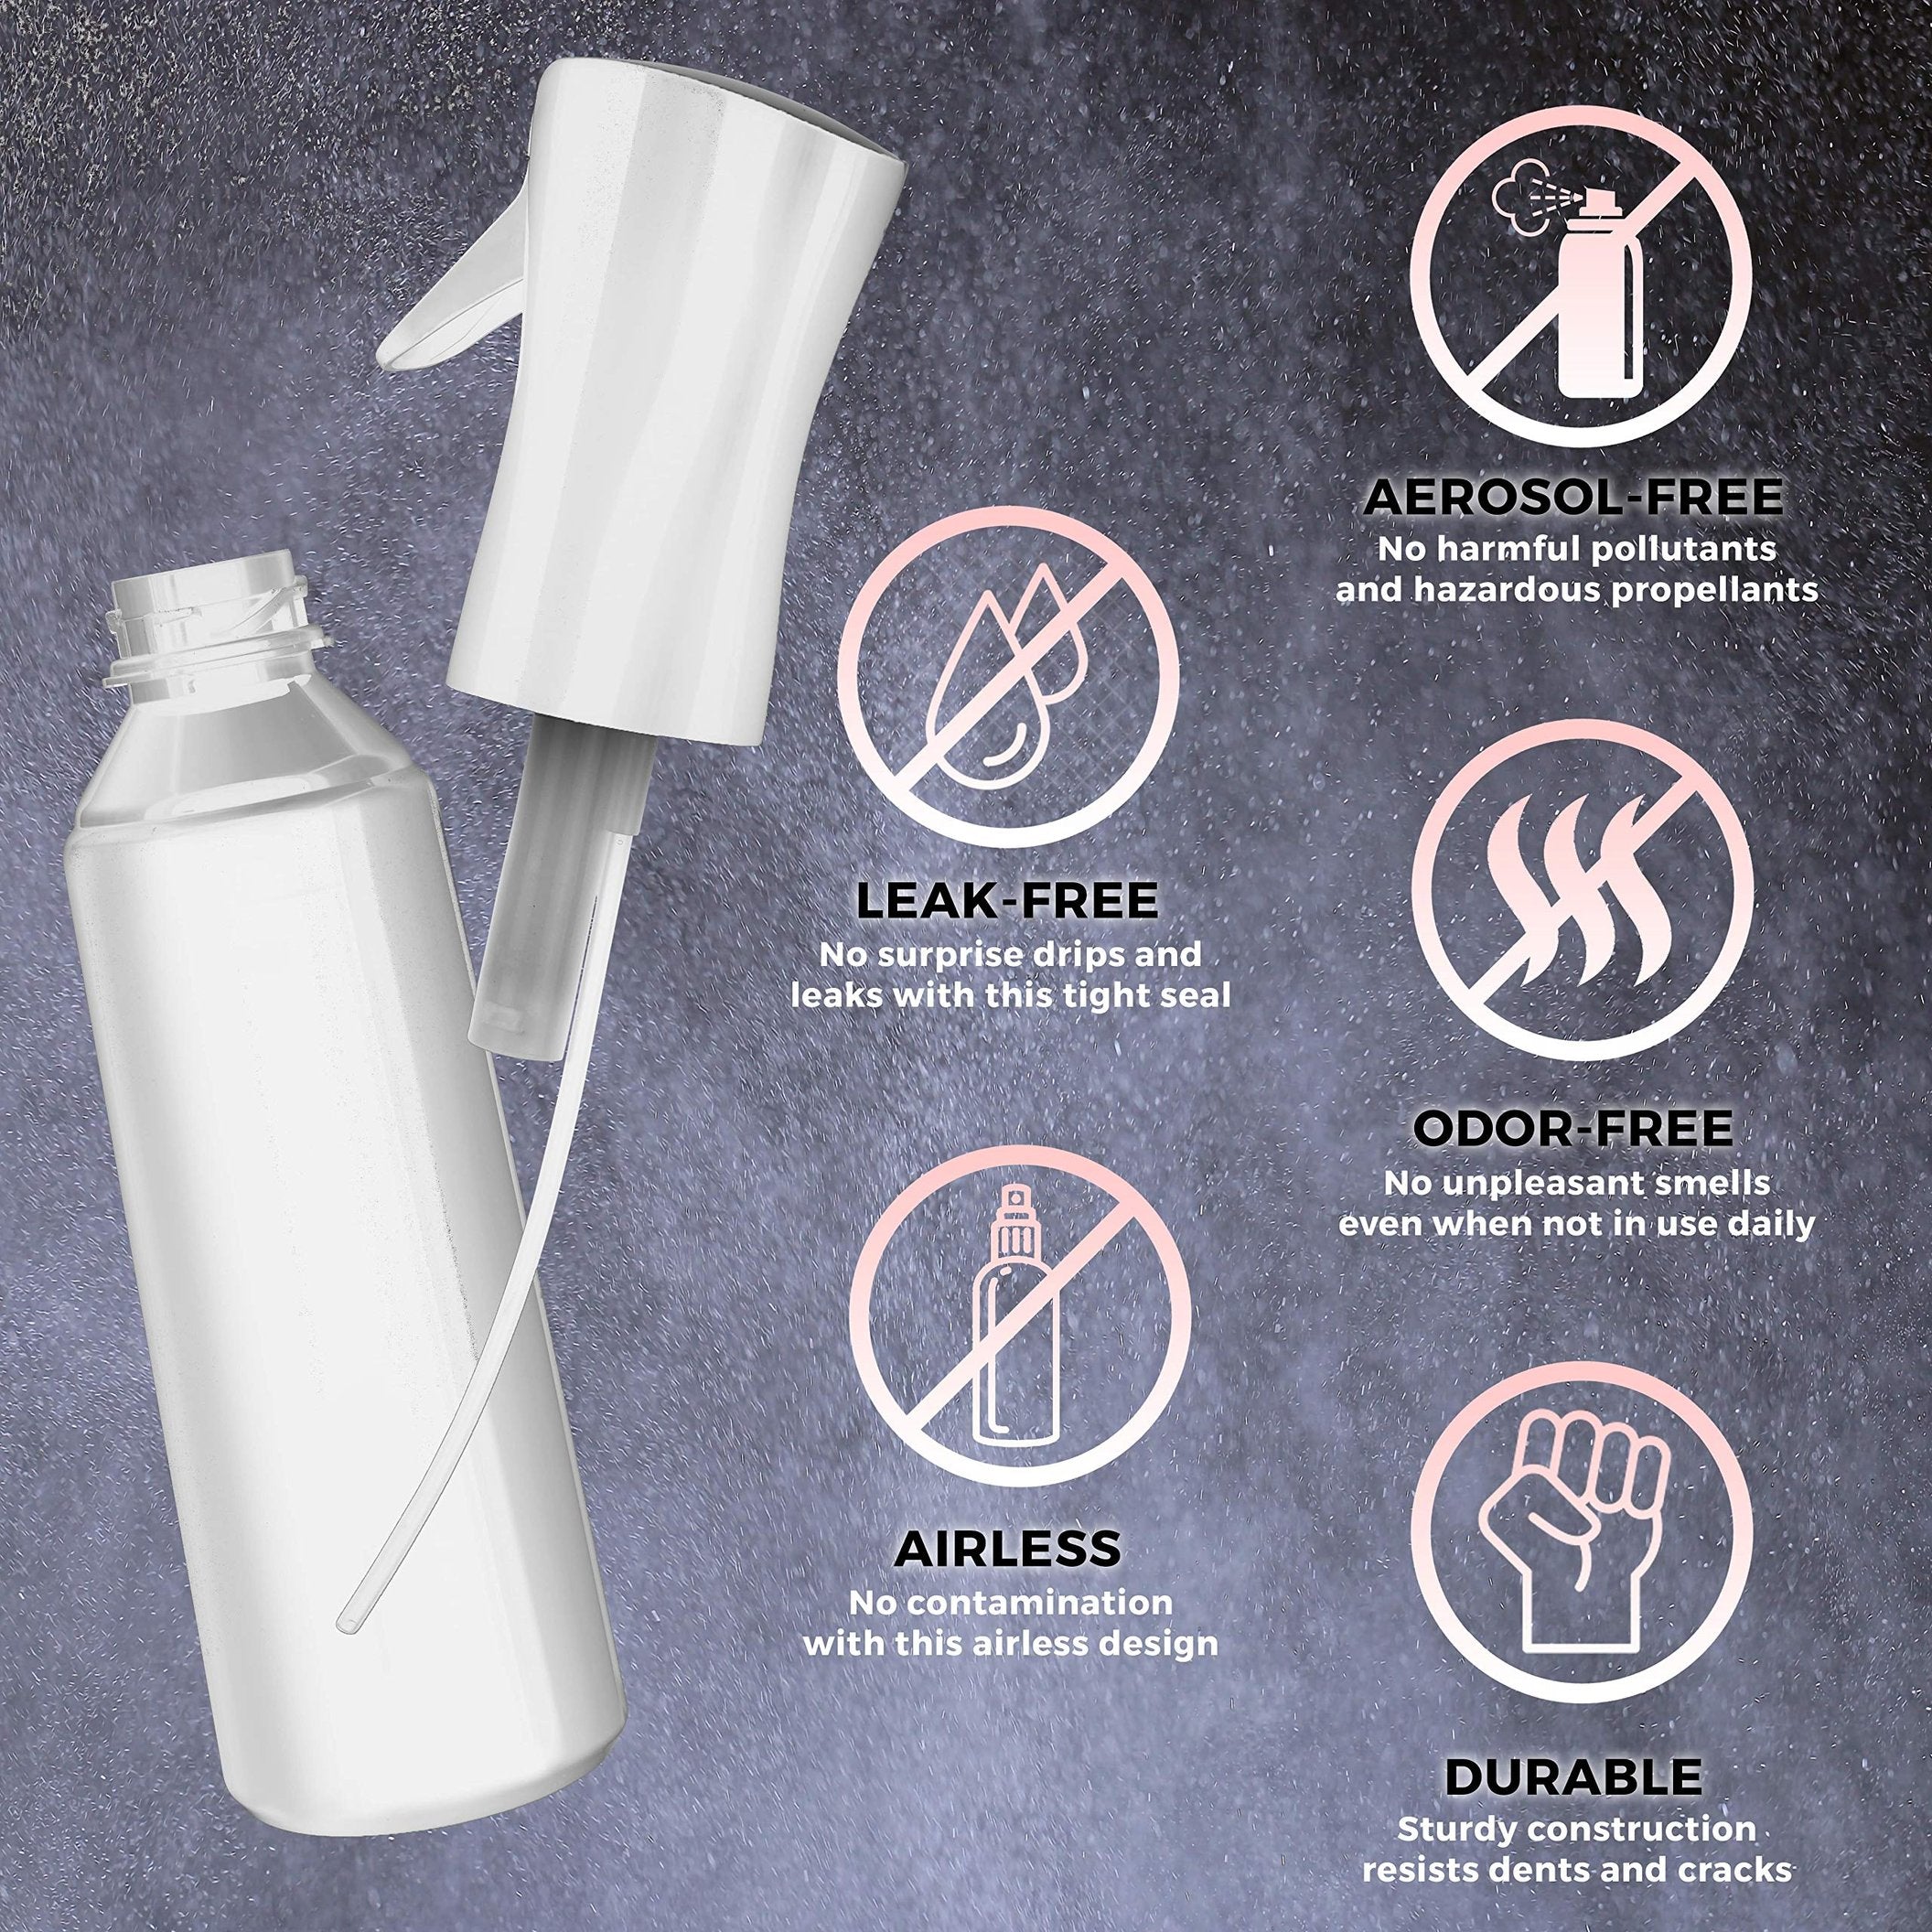 2-Pack Empty Continuous Spray Bottles 10oz - Ultra Fine Mist for Hairstyling, Plants, Cleaning, Cooking & Skin Care - White